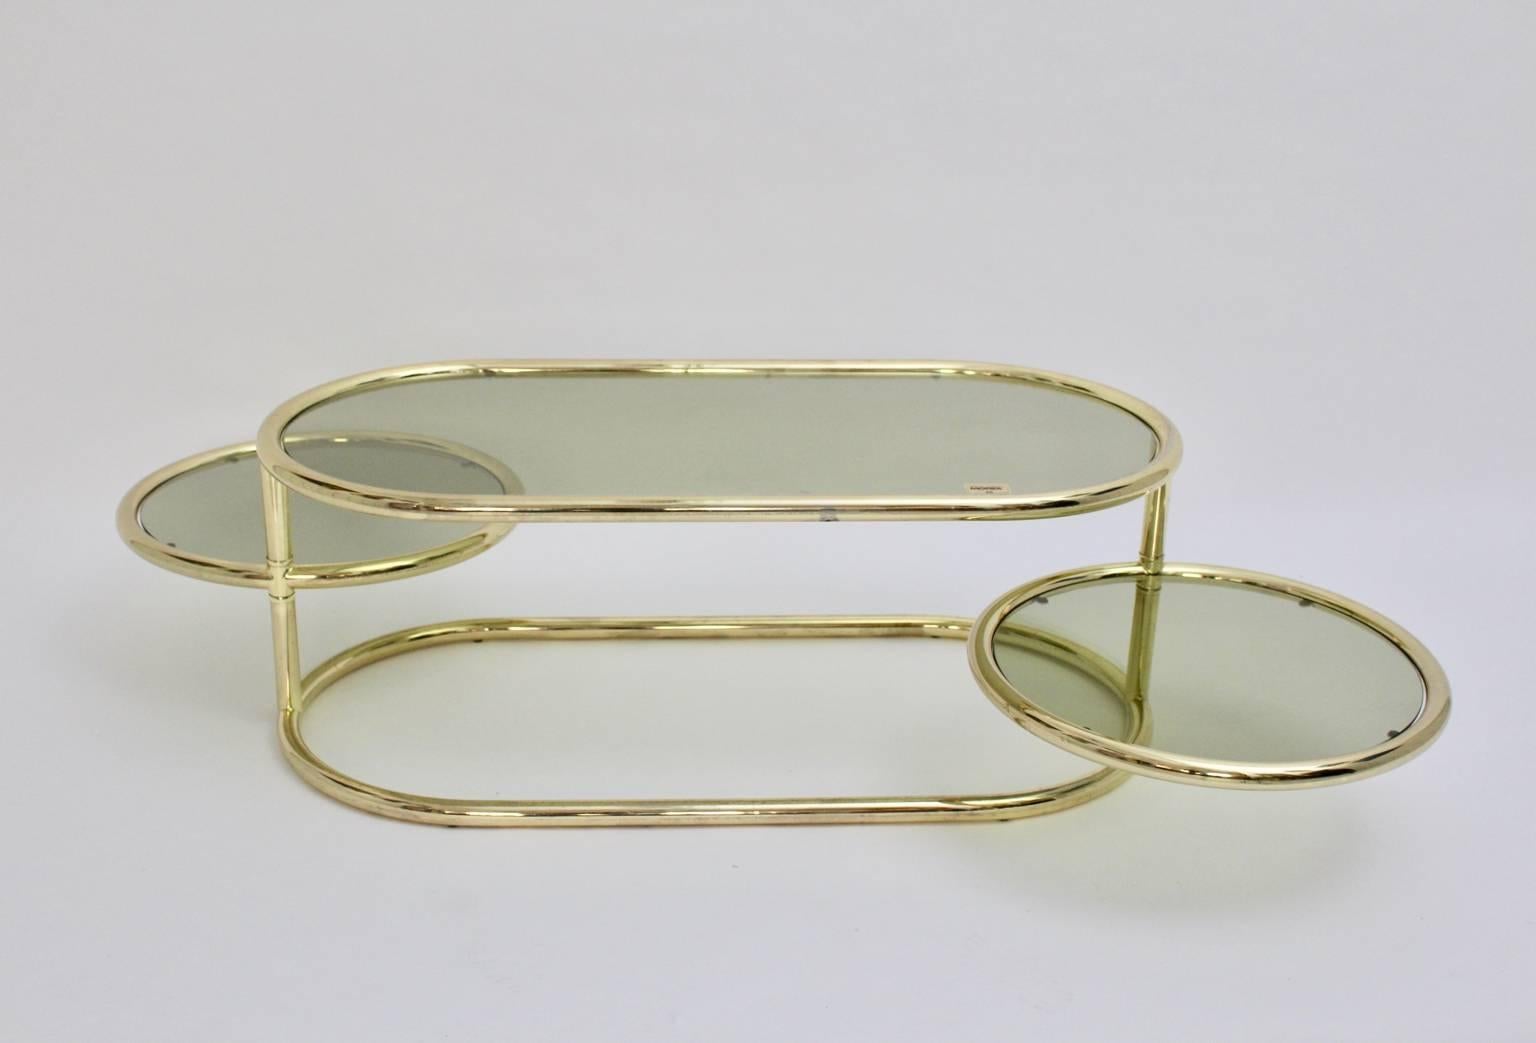 Metal Brass Swiveling Vintage Coffee Table Green Smoked Glass Plates by Morex 1970s